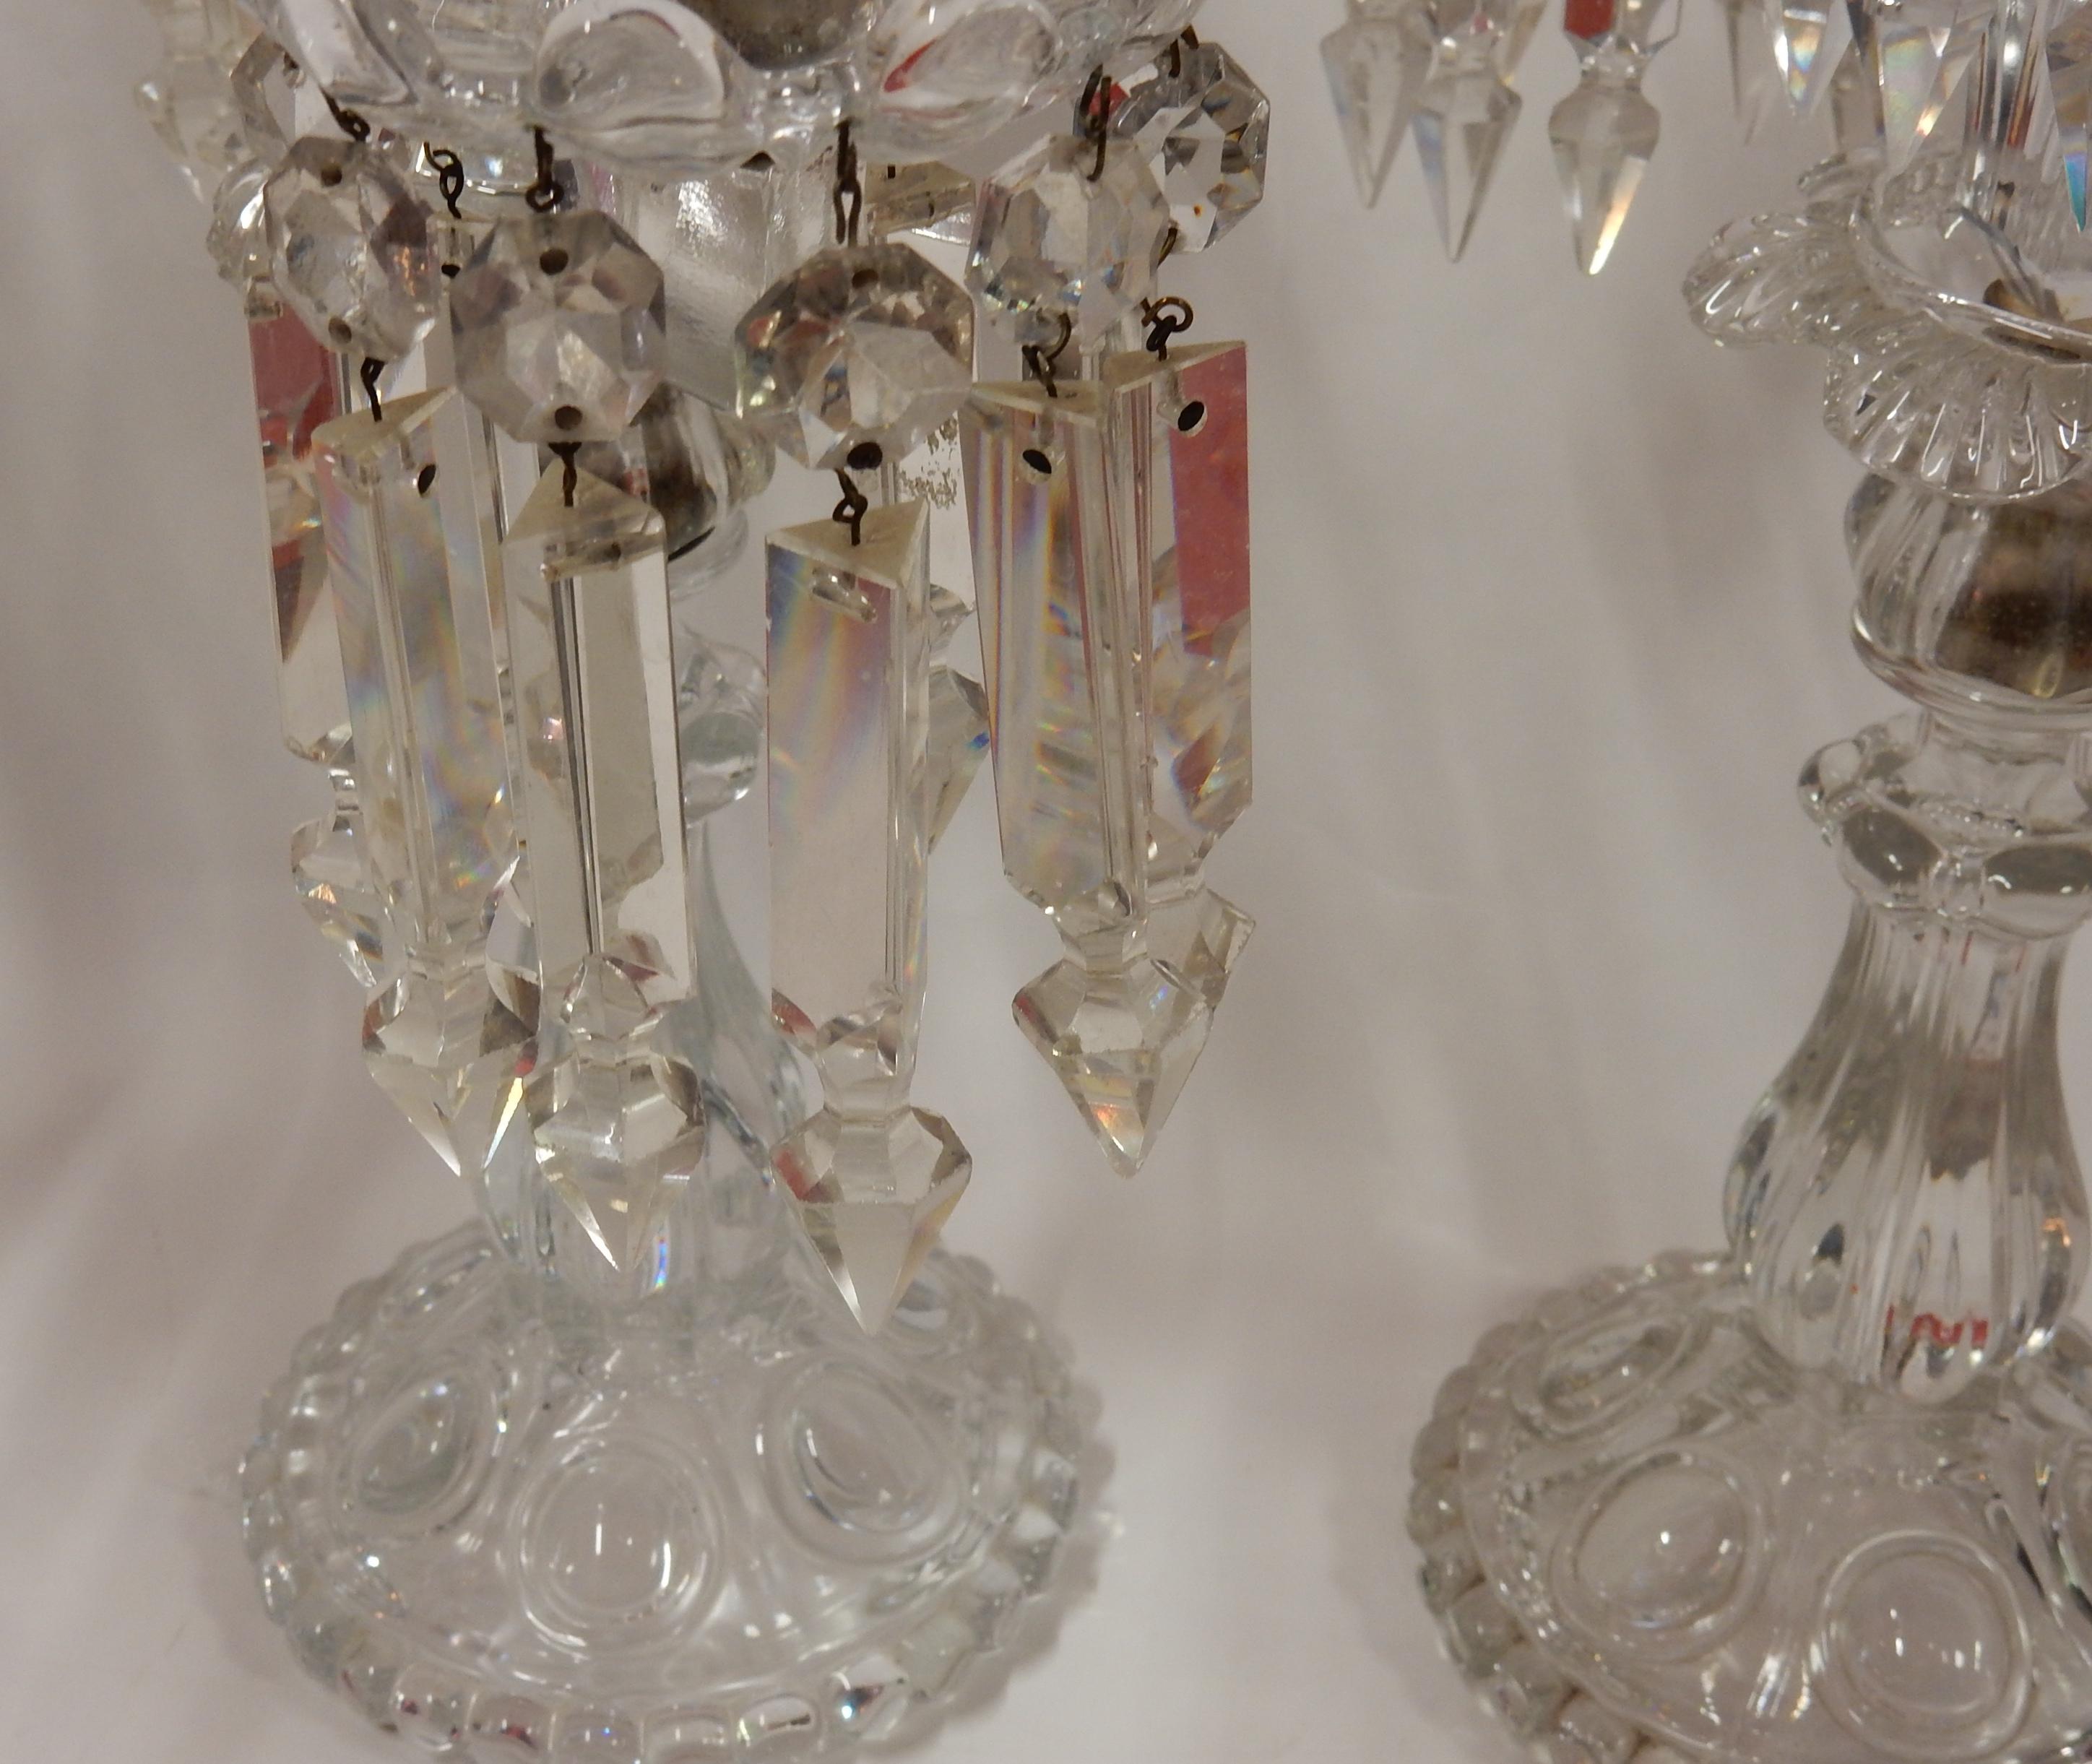 Serie of 4 crystal candlesticks with 2 arms with prismatic cut pendants with a step to end in a point, round base decorated with bumps and round pearls. Signed Baccarat, 3 signed in relief and one with engraved stamp, when it’s signed, its authentic